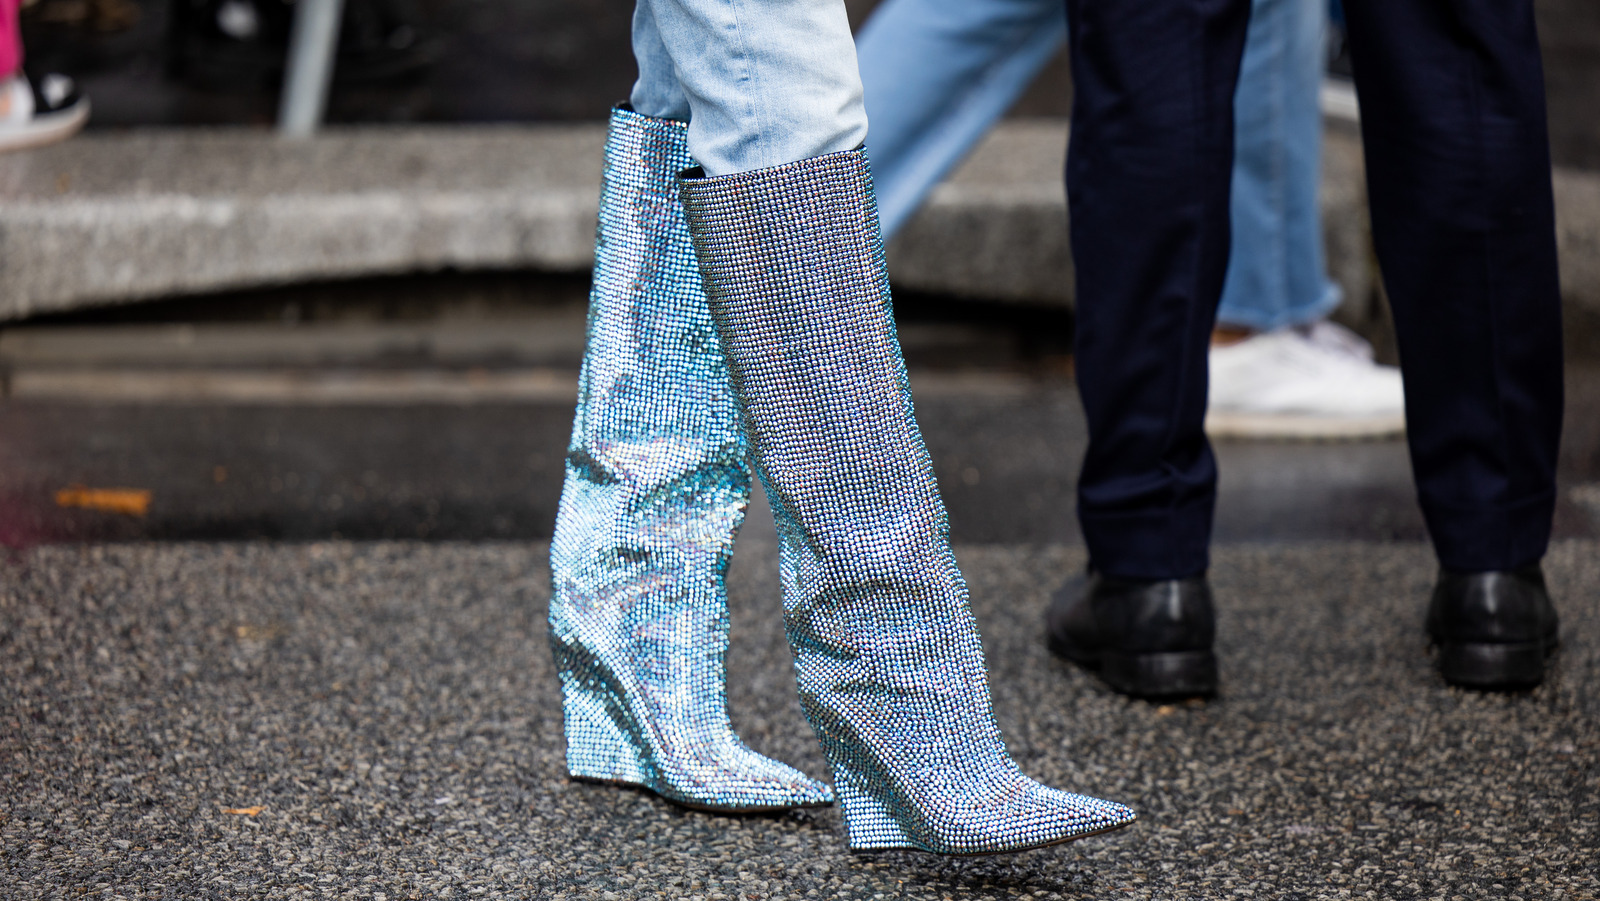 Here's How To Rock The Return Of The Wedge This Winter